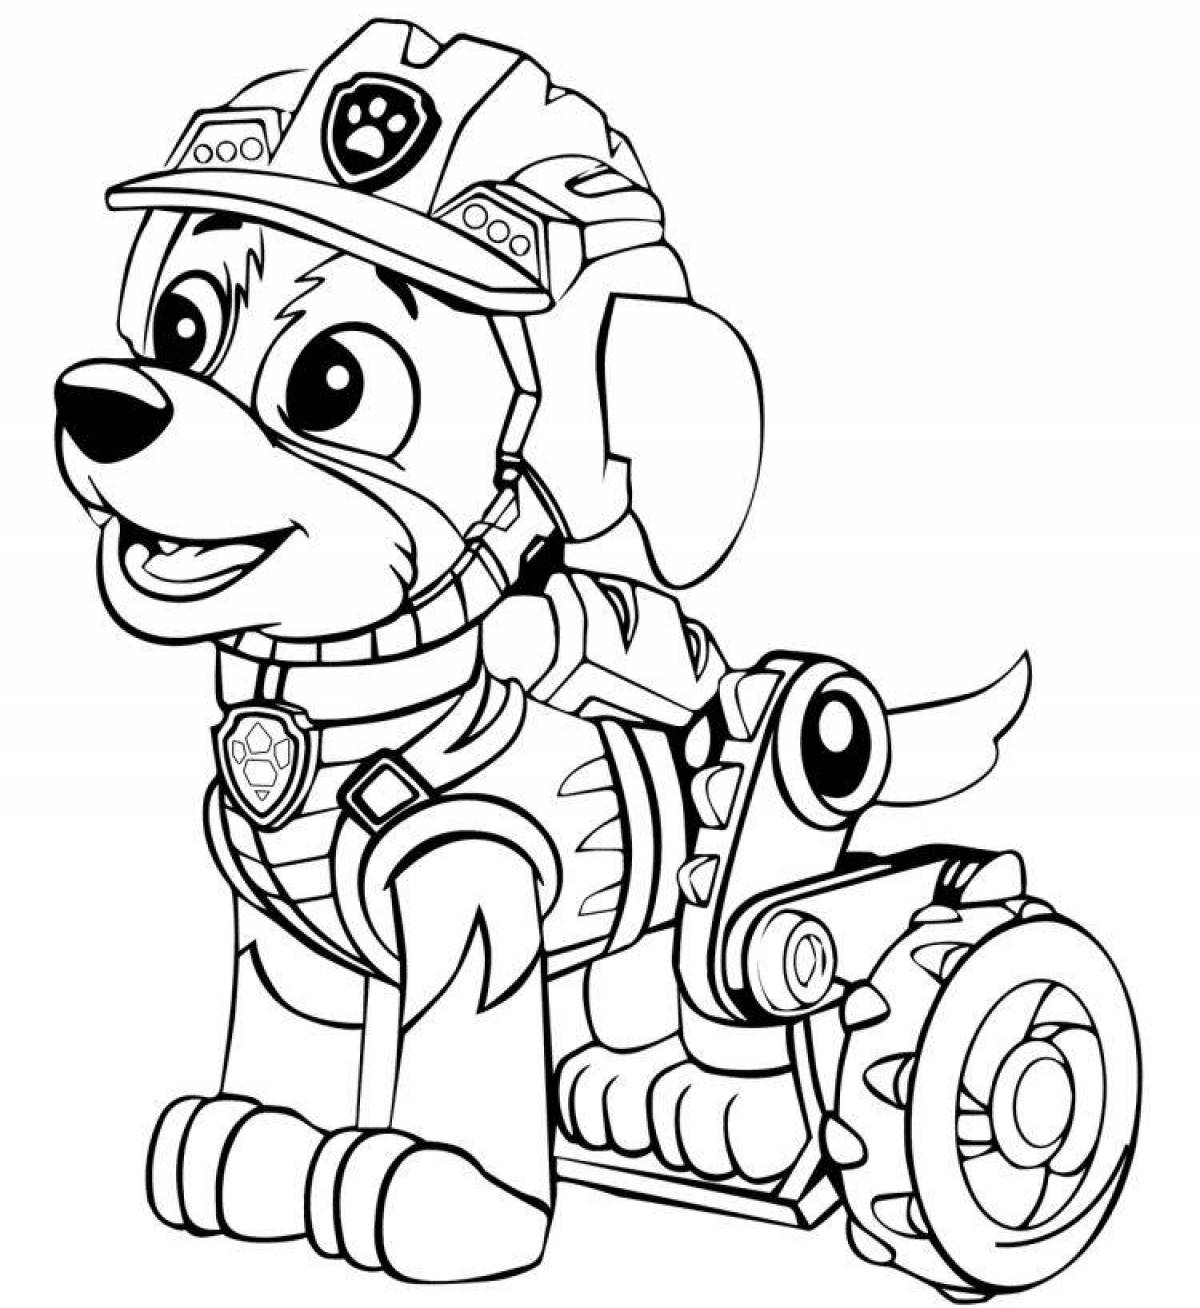 Coloring page nice freedom paw patrol